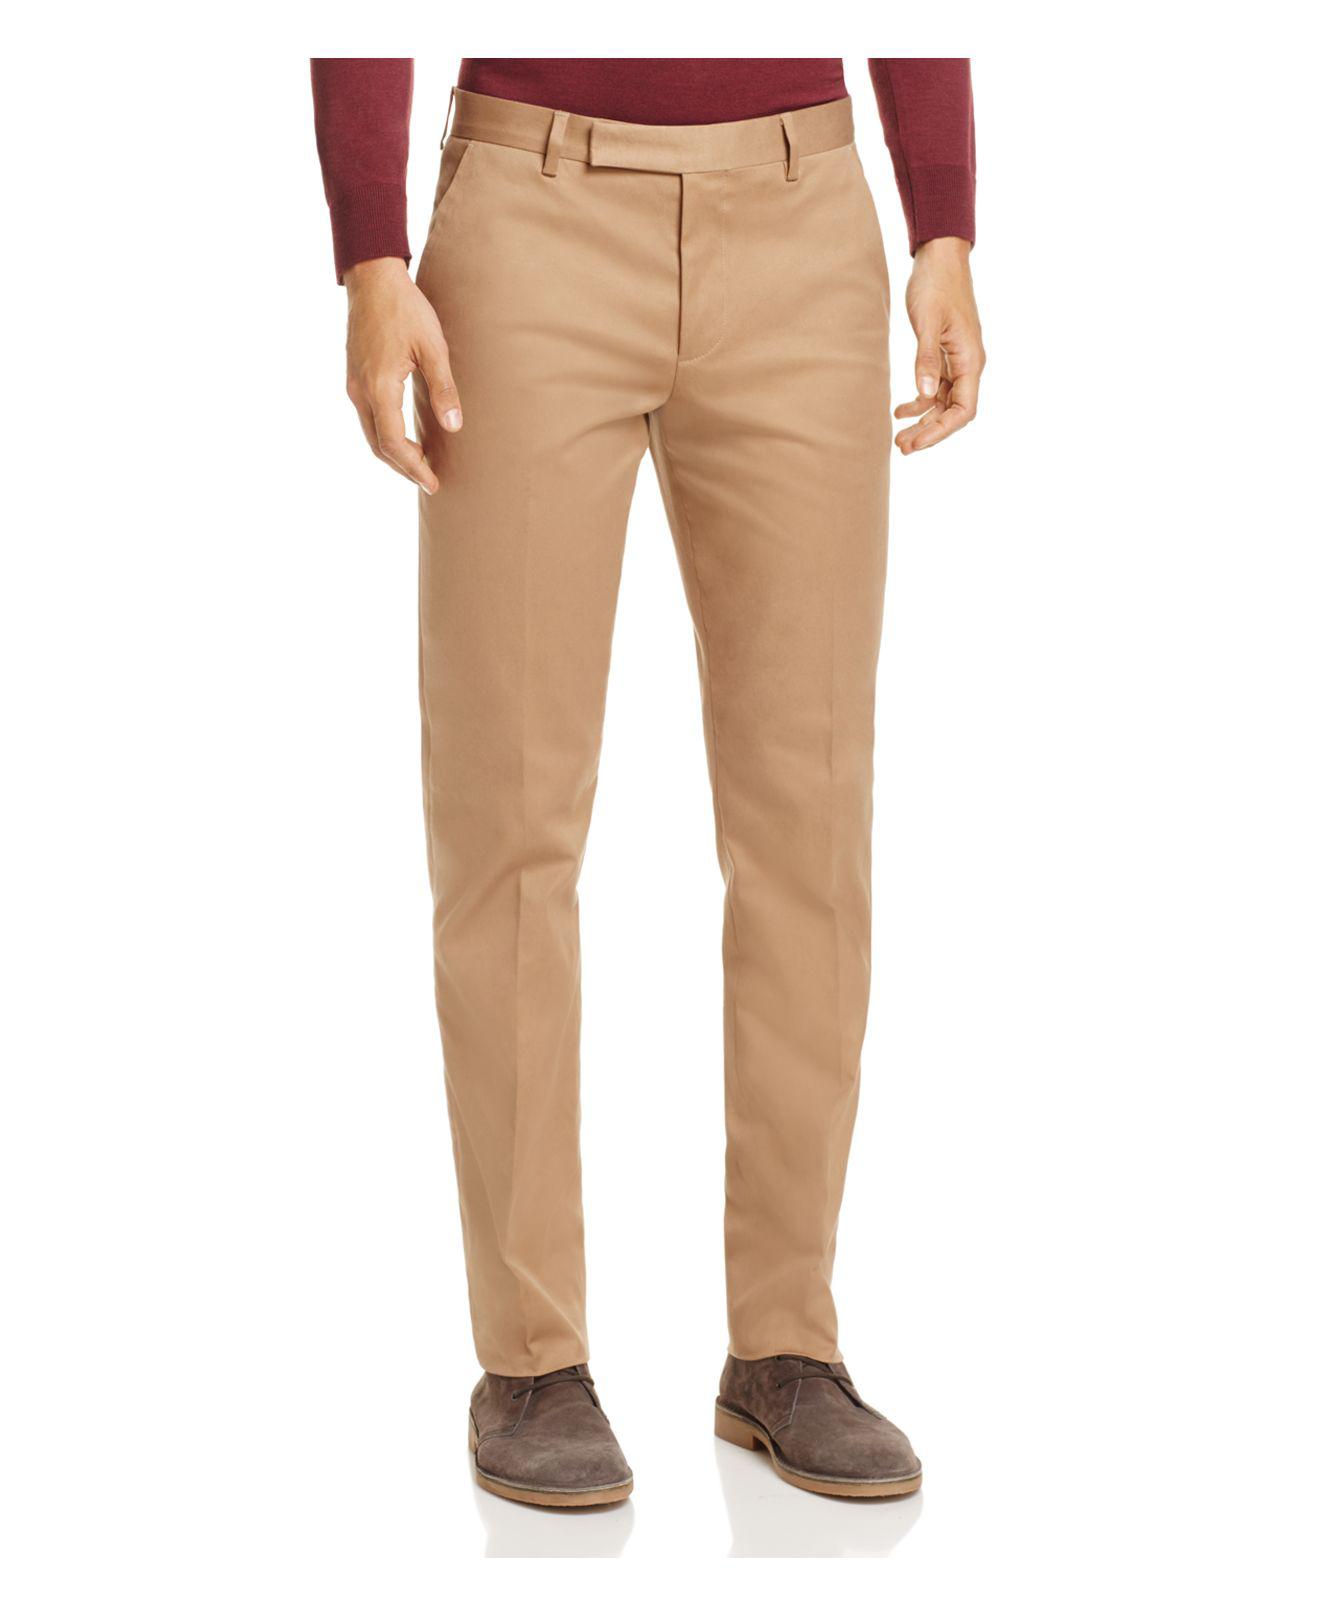 Lyst - Paul Smith Solid Slim Fit Trousers in Natural for Men